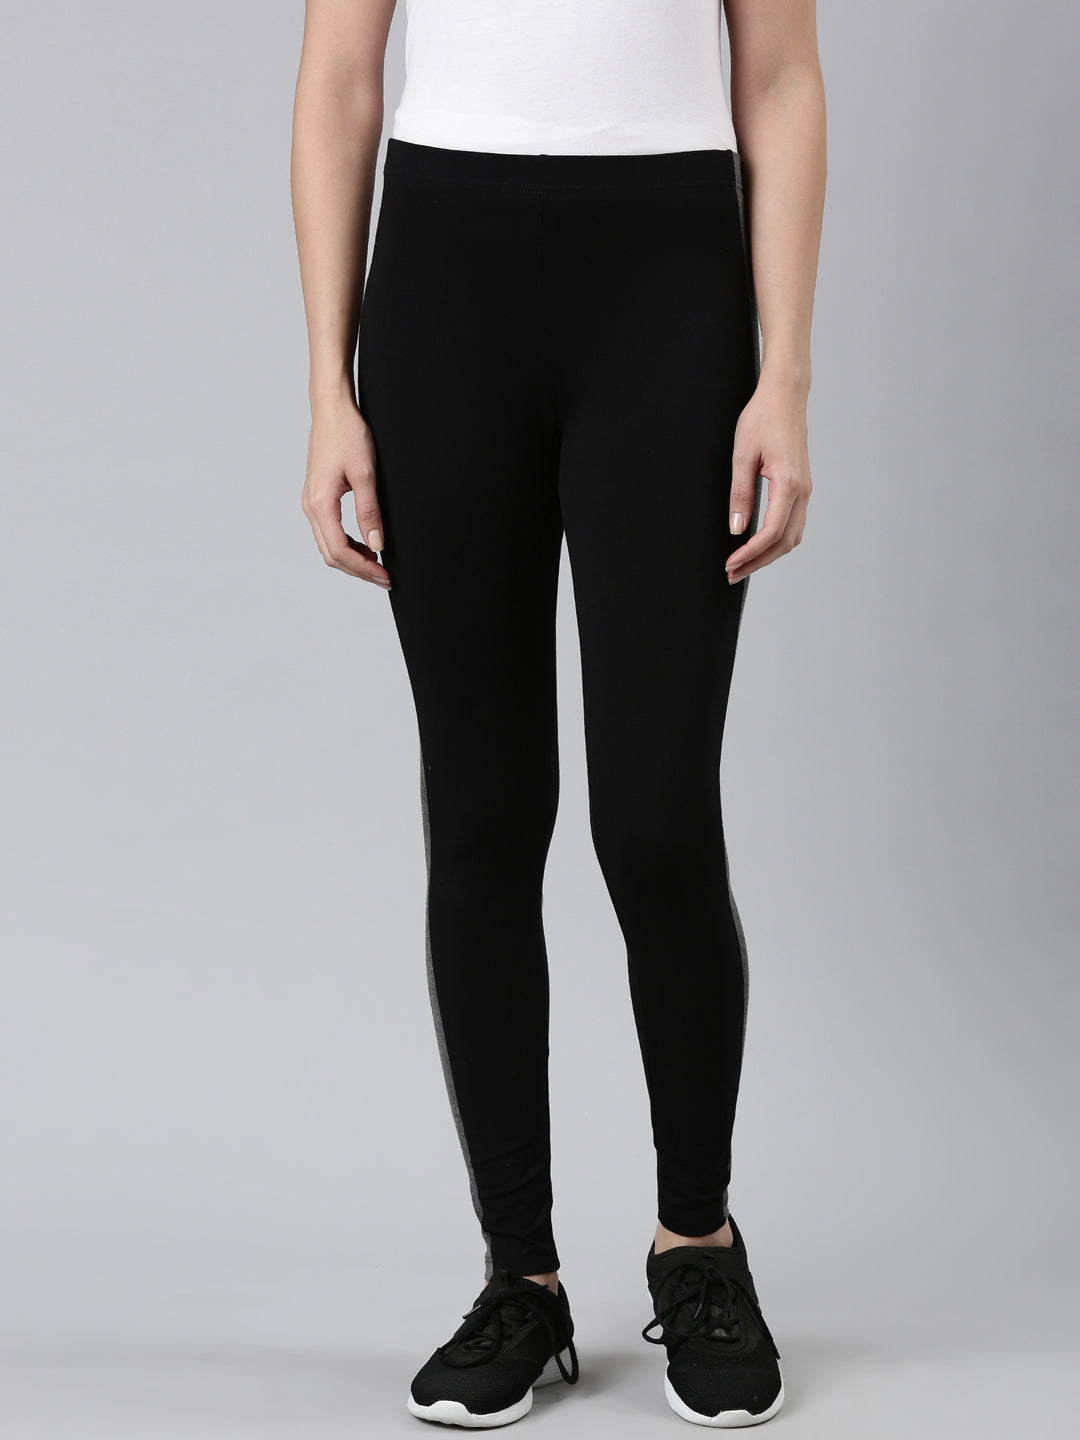 Women’s Knit Active Tight